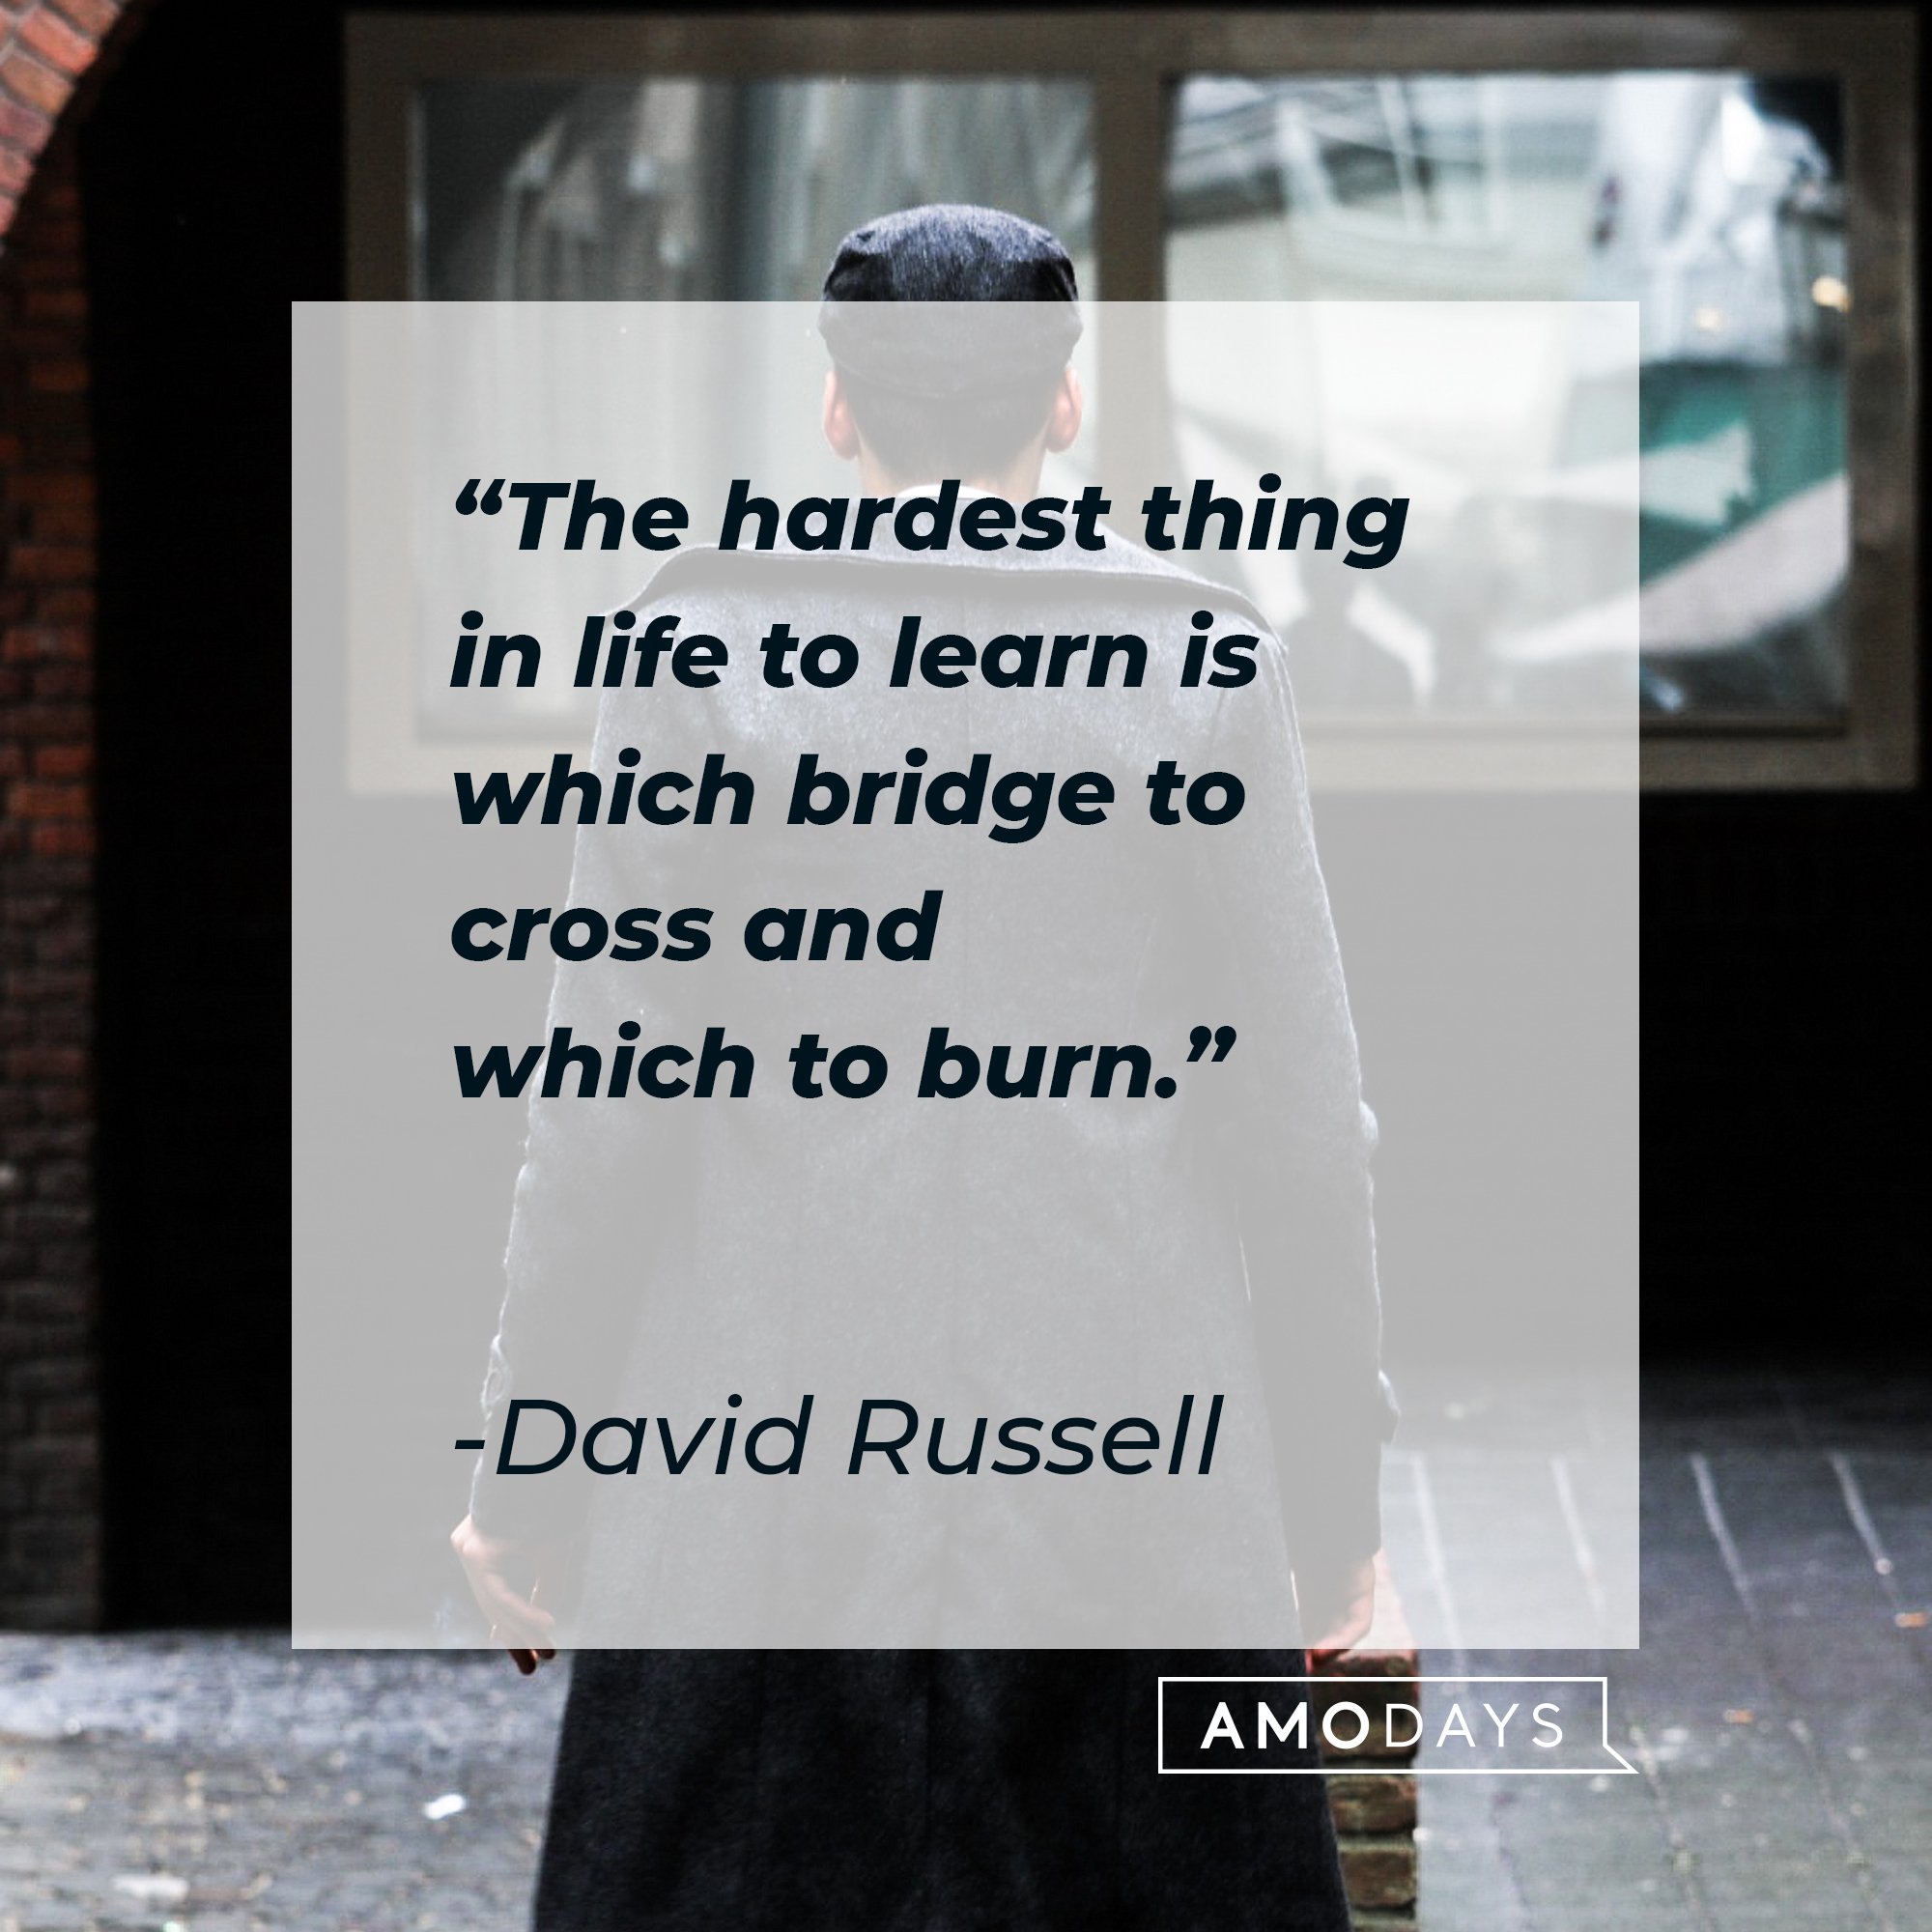 David Russell's quote: "The hardest thing in life to learn is which bridge to cross and which to burn." | Image: AmoDays